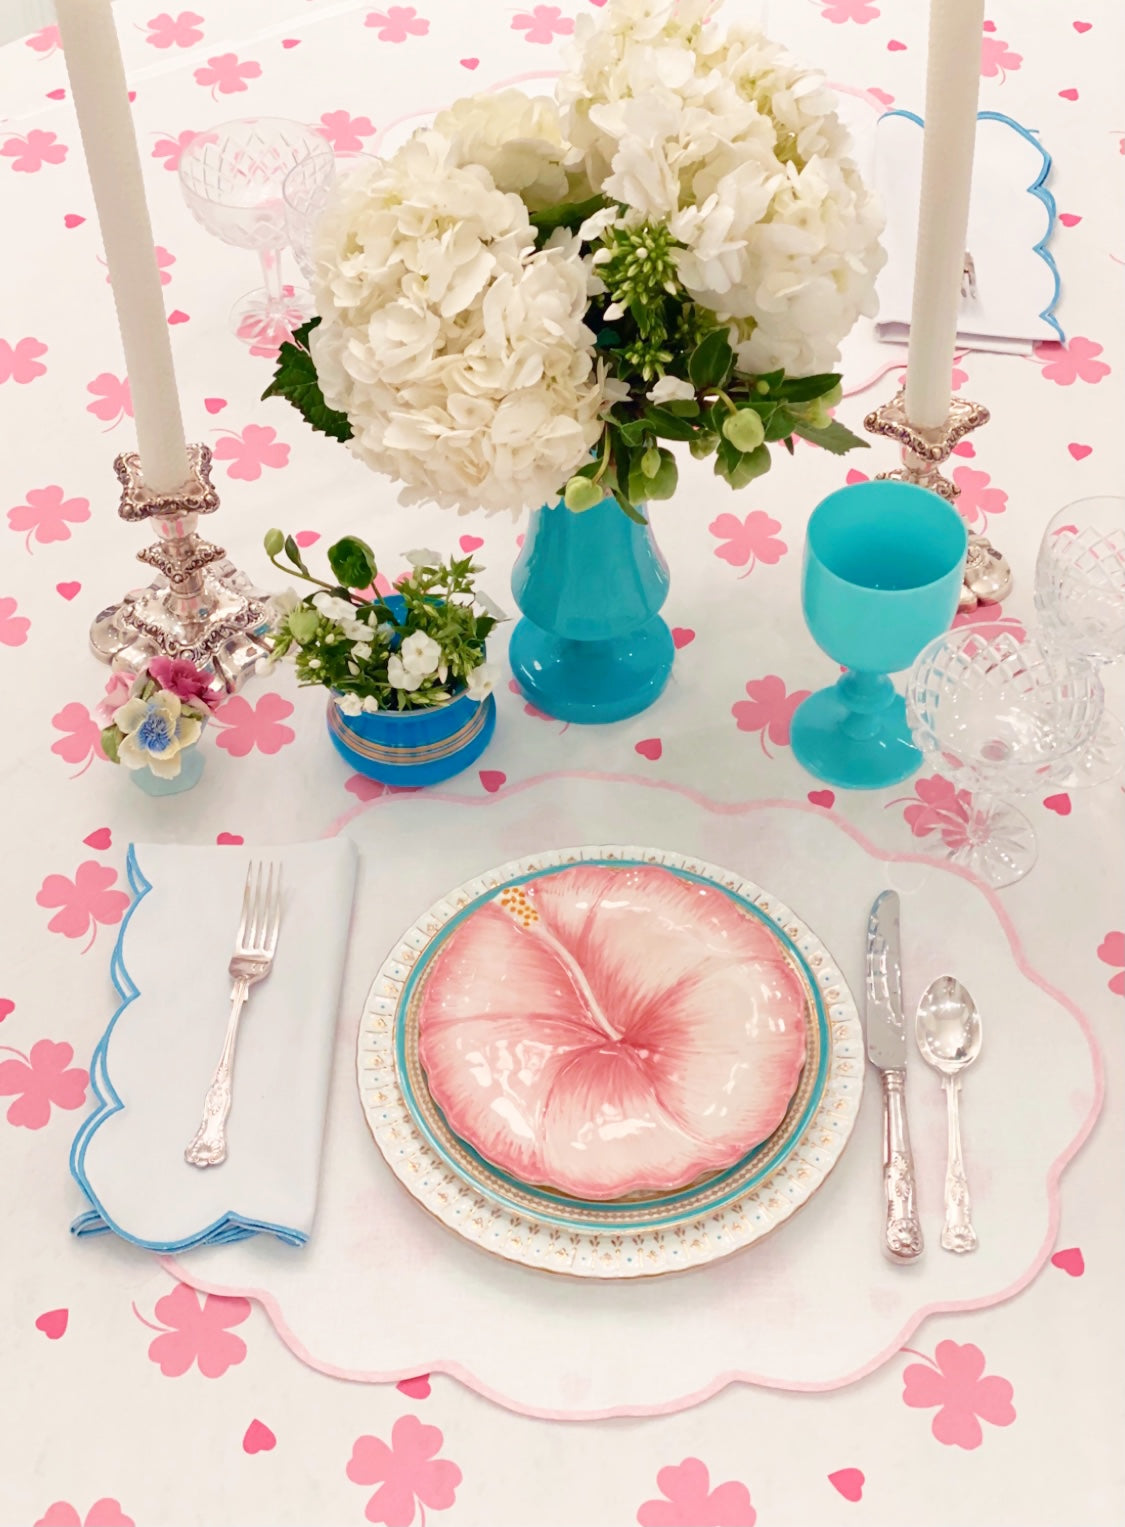 Pink Clover and Heart Tablecloth